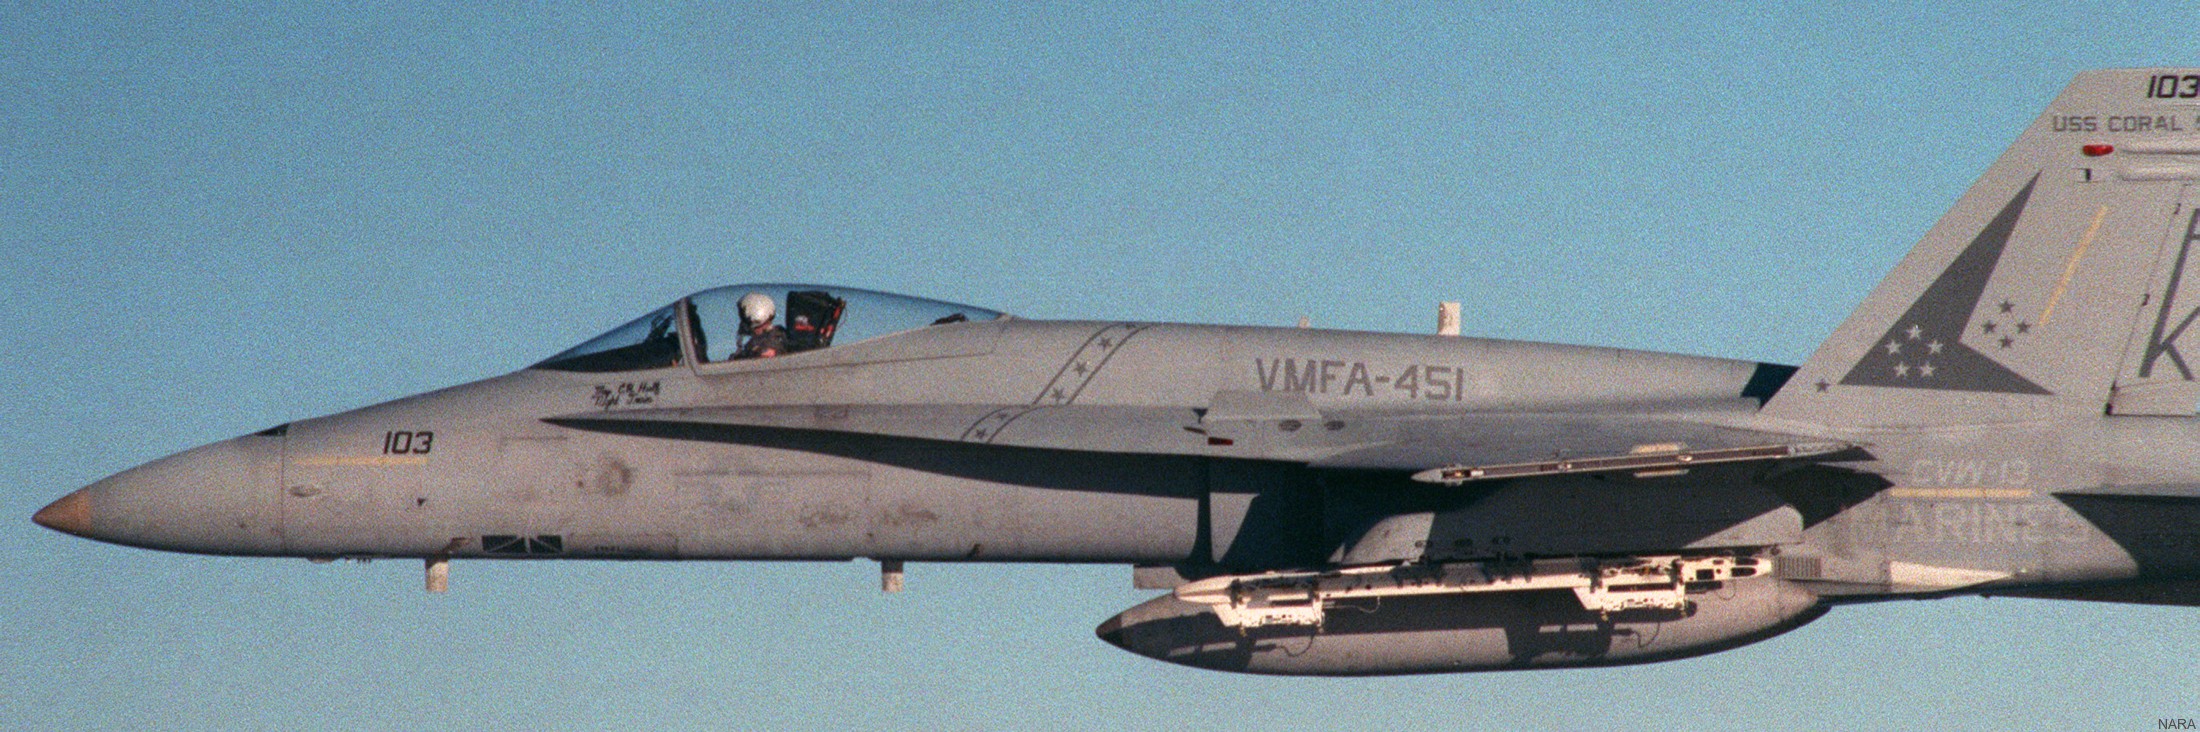 vmfa-451 warlords marine fighter attack squadron usmc f/a-18a hornet 09 carrier air wing cvw-13 uss coral sea cv-43